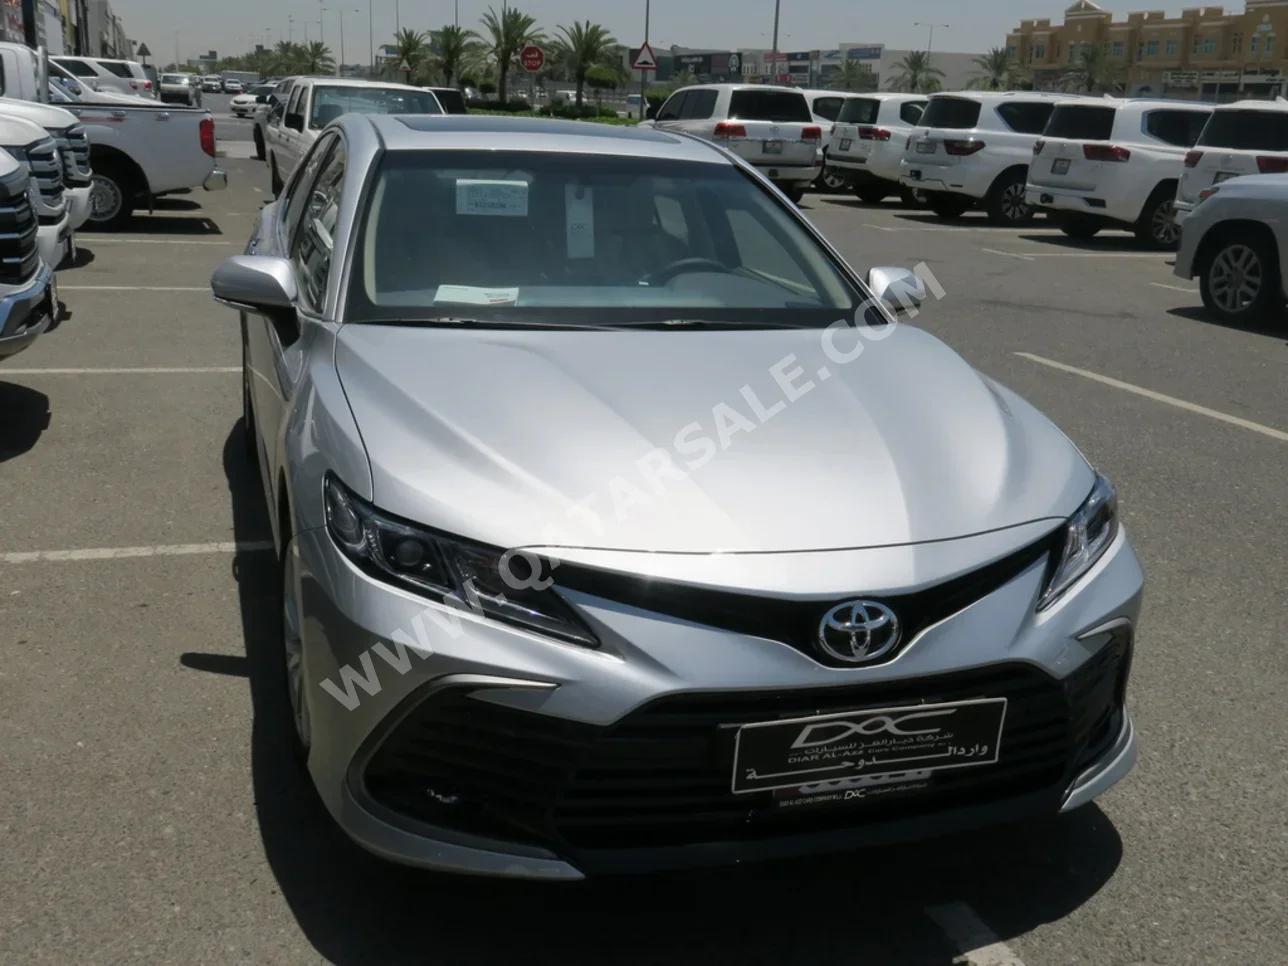  Toyota  Camry  GLE  2024  Automatic  0 Km  4 Cylinder  Front Wheel Drive (FWD)  Sedan  Silver  With Warranty